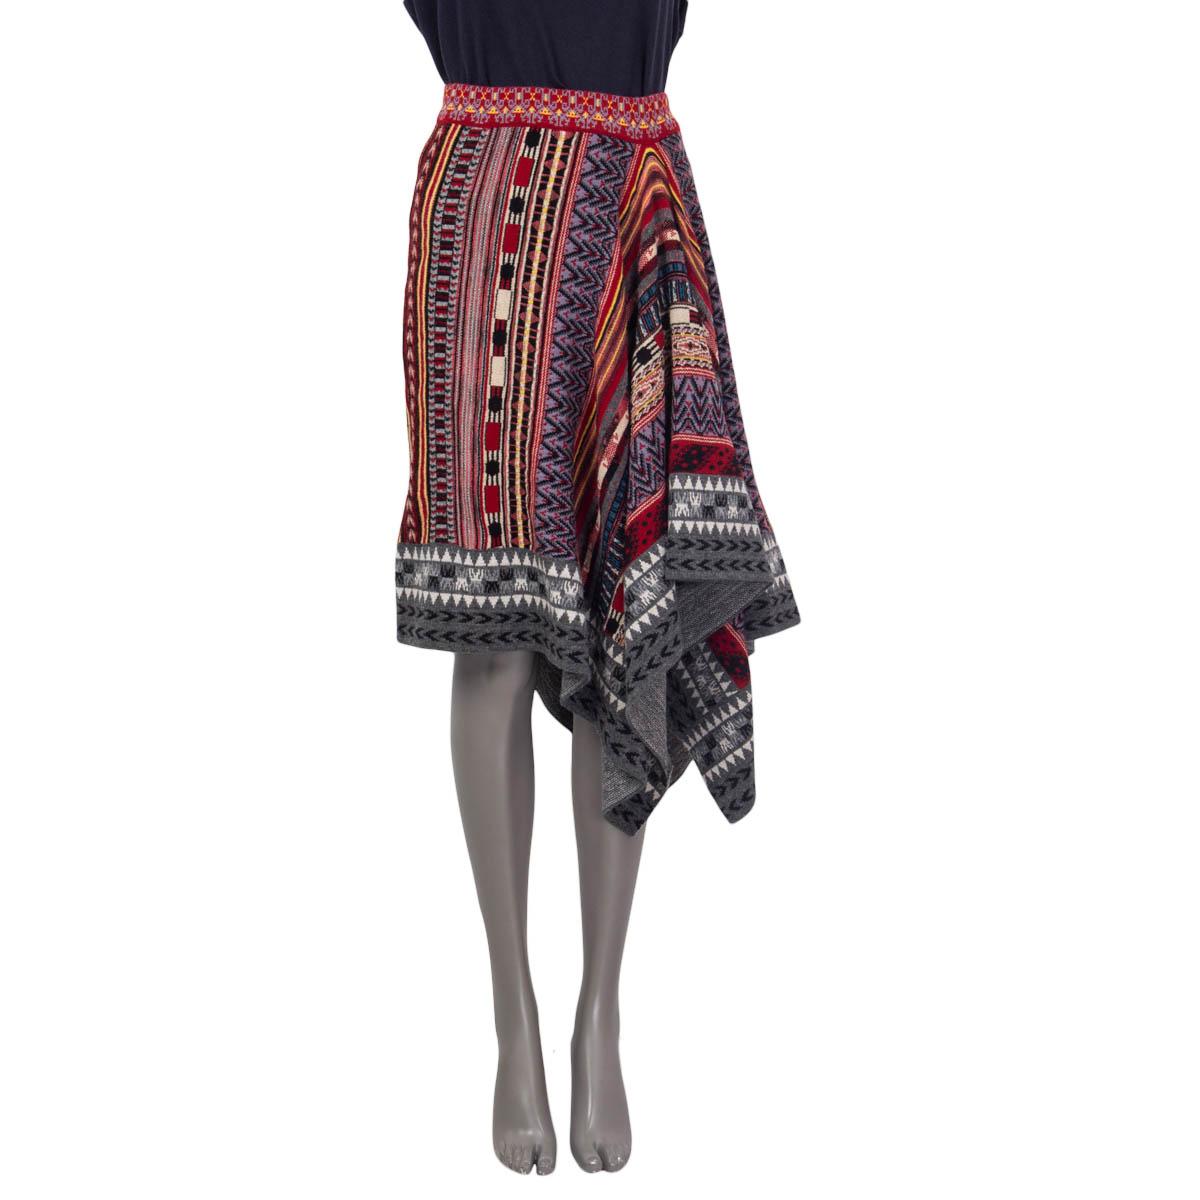 100% authentic Etro high waist knit skirt in multicolored wool (86%), viscose (13%) and polyamide (1%). Features a asymmetric hem. Unlined. Has been worn once and is in virtually new condition. 

Measurements
Tag Size	42
Size	M
Waist	64cm (25in) to